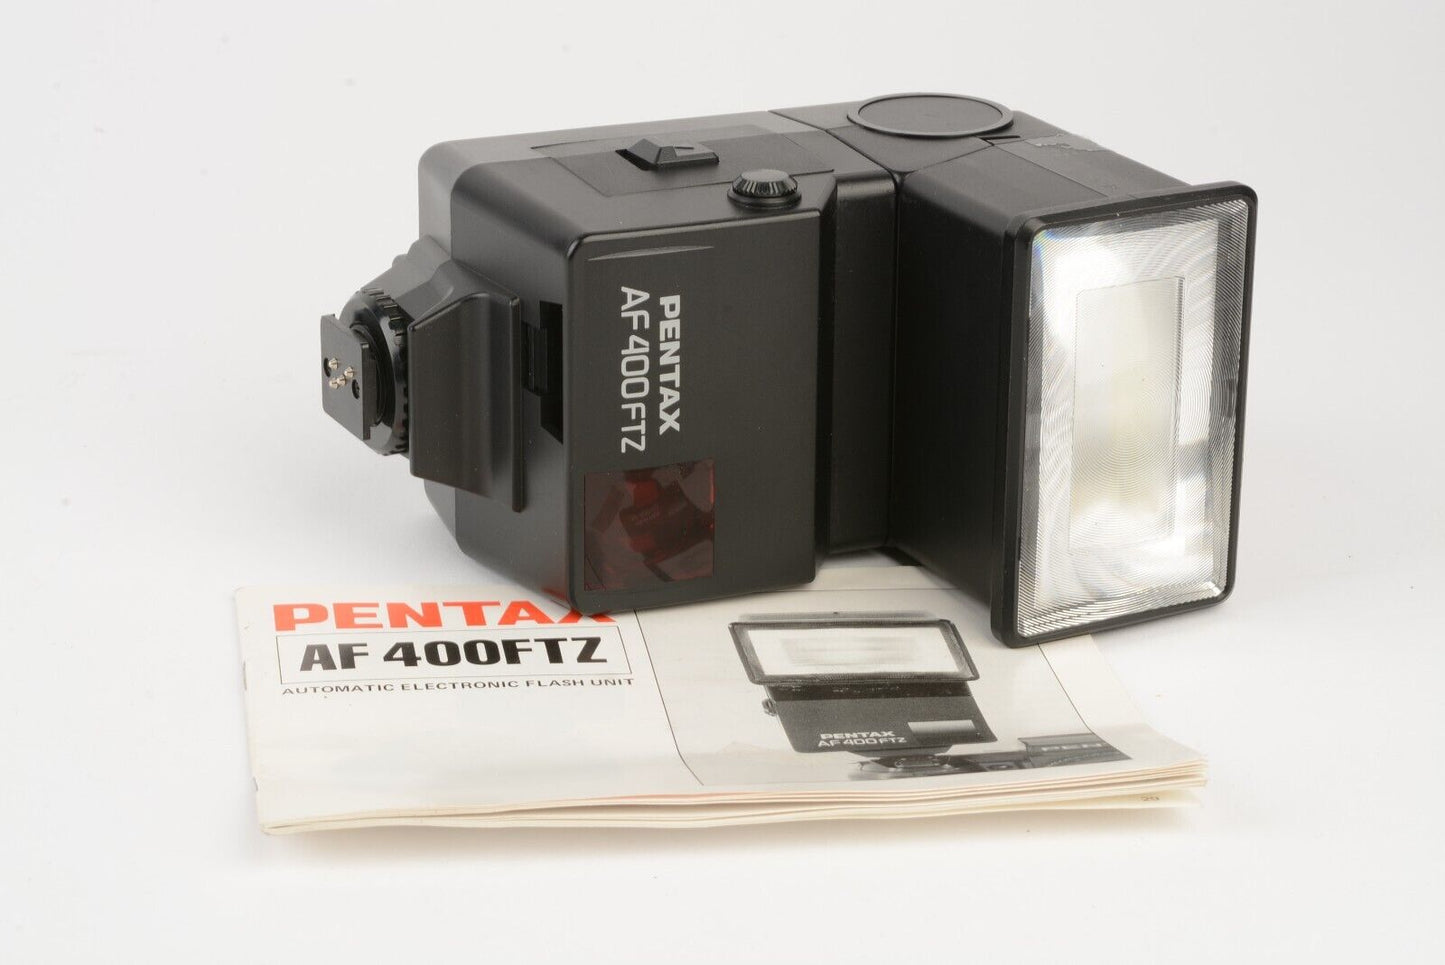 EXC++ PENTAX AF400FTZ SHOE MOUNT FLASH, MANUAL, VERY CLEAN, FULLY TESTED